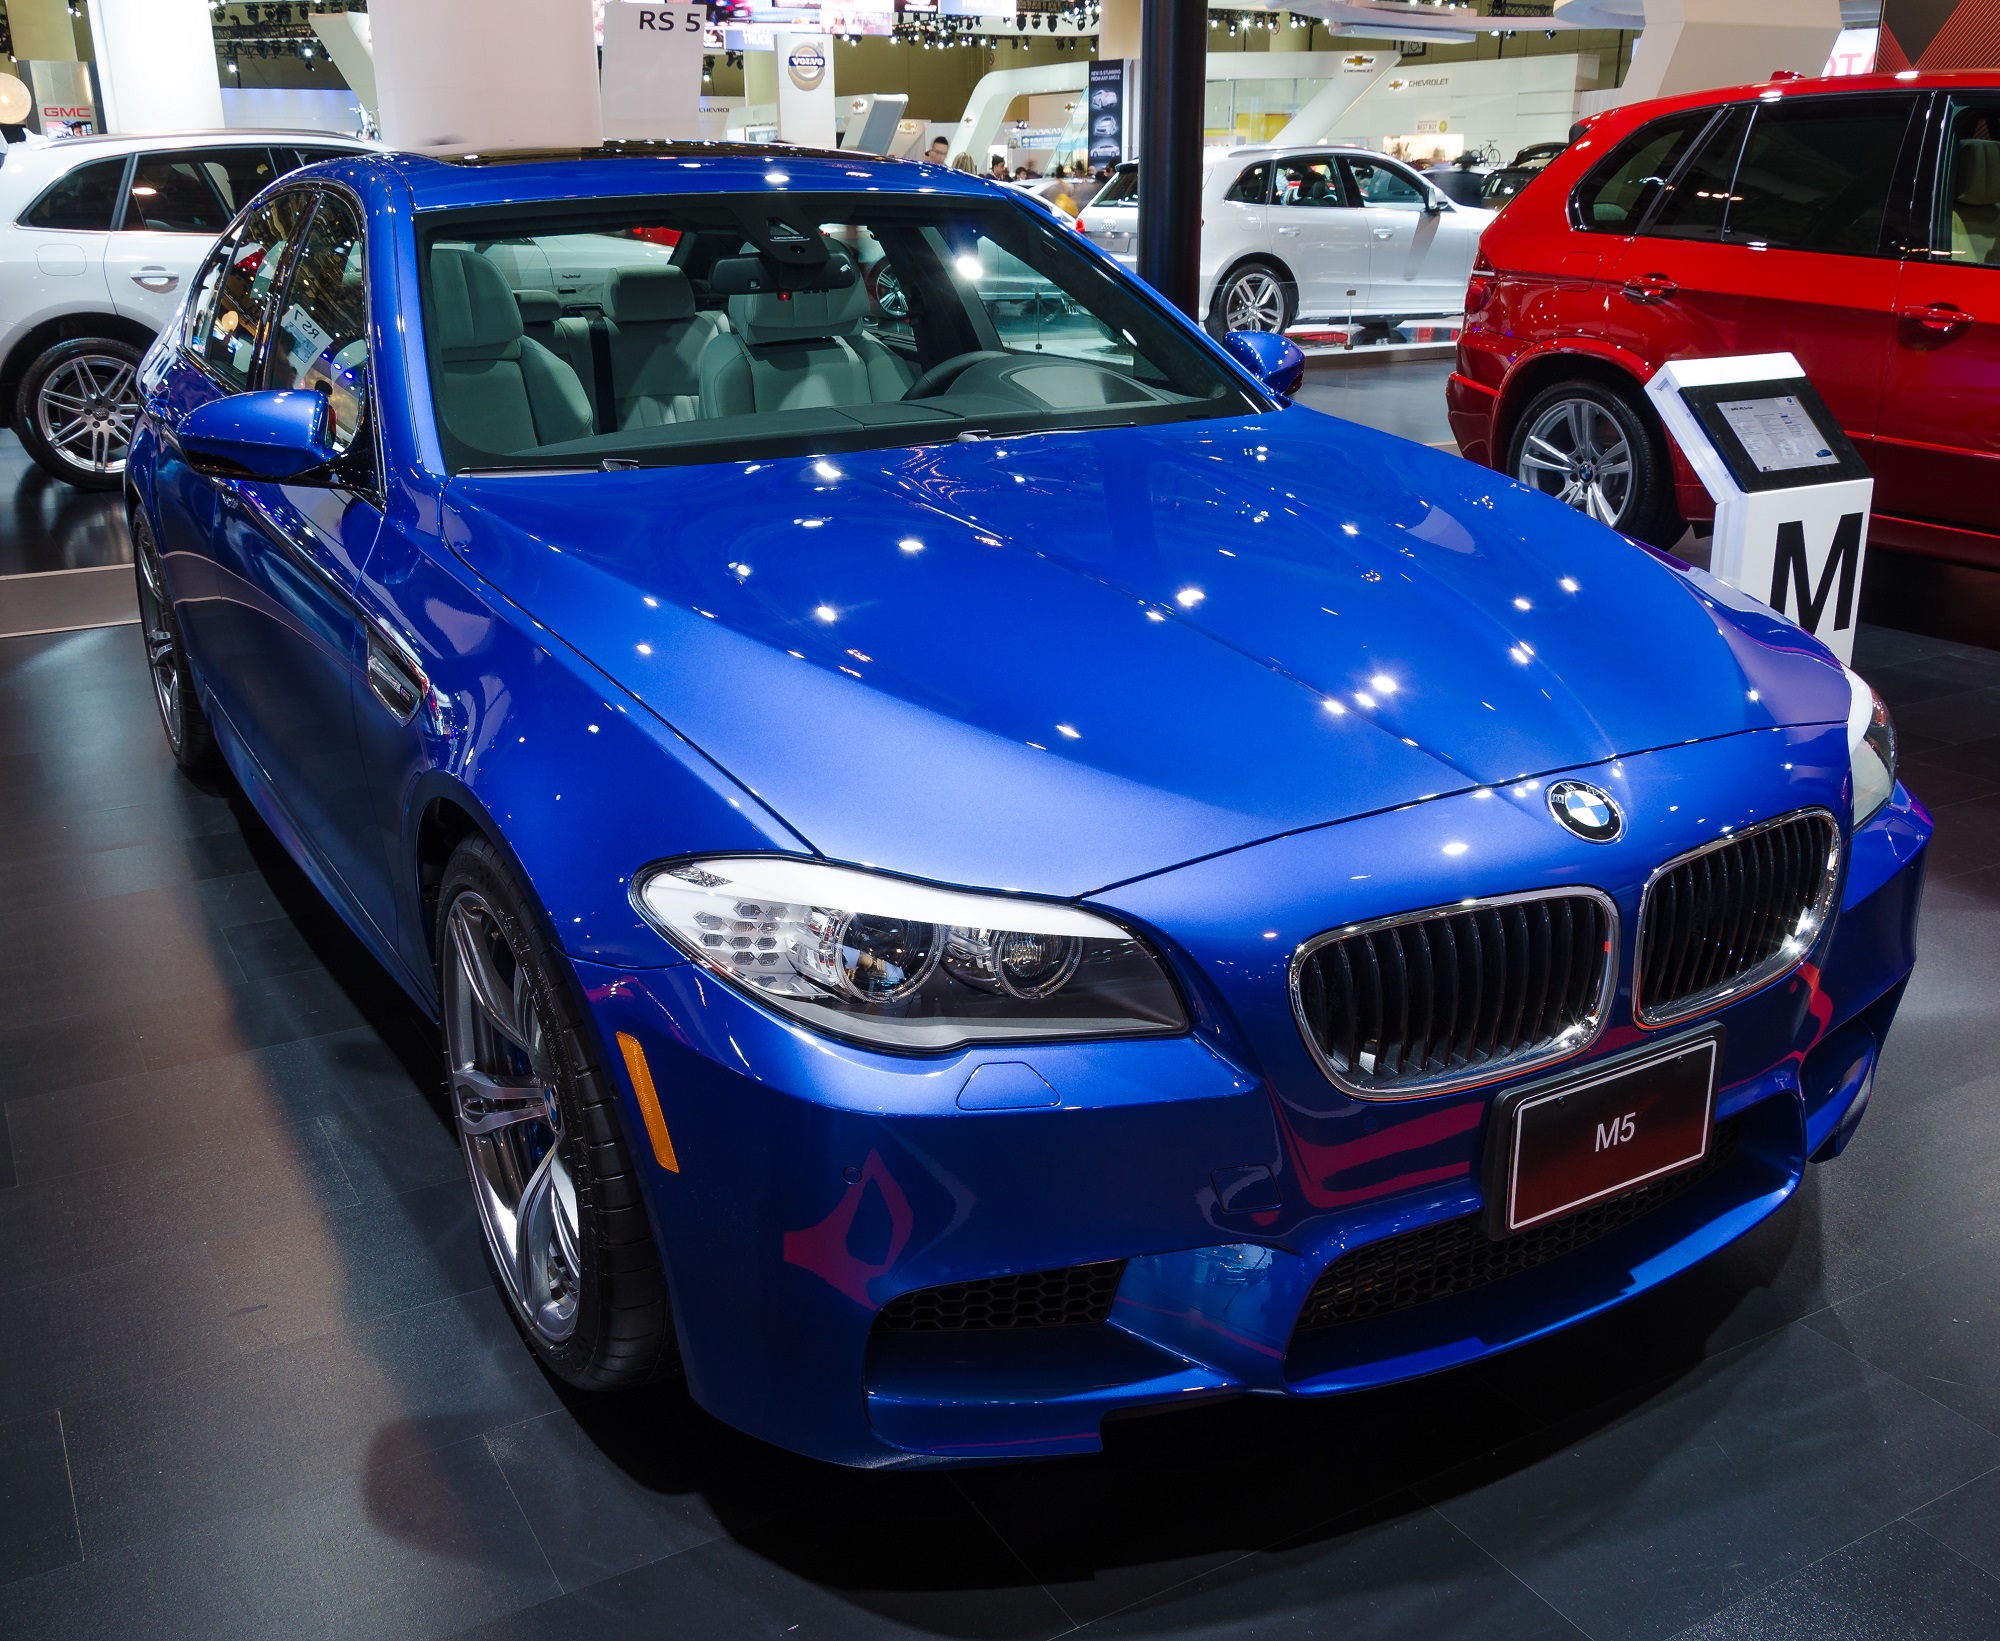 The BMW M5, like this blue one, is a used car faster than a Ford Mustang GT.